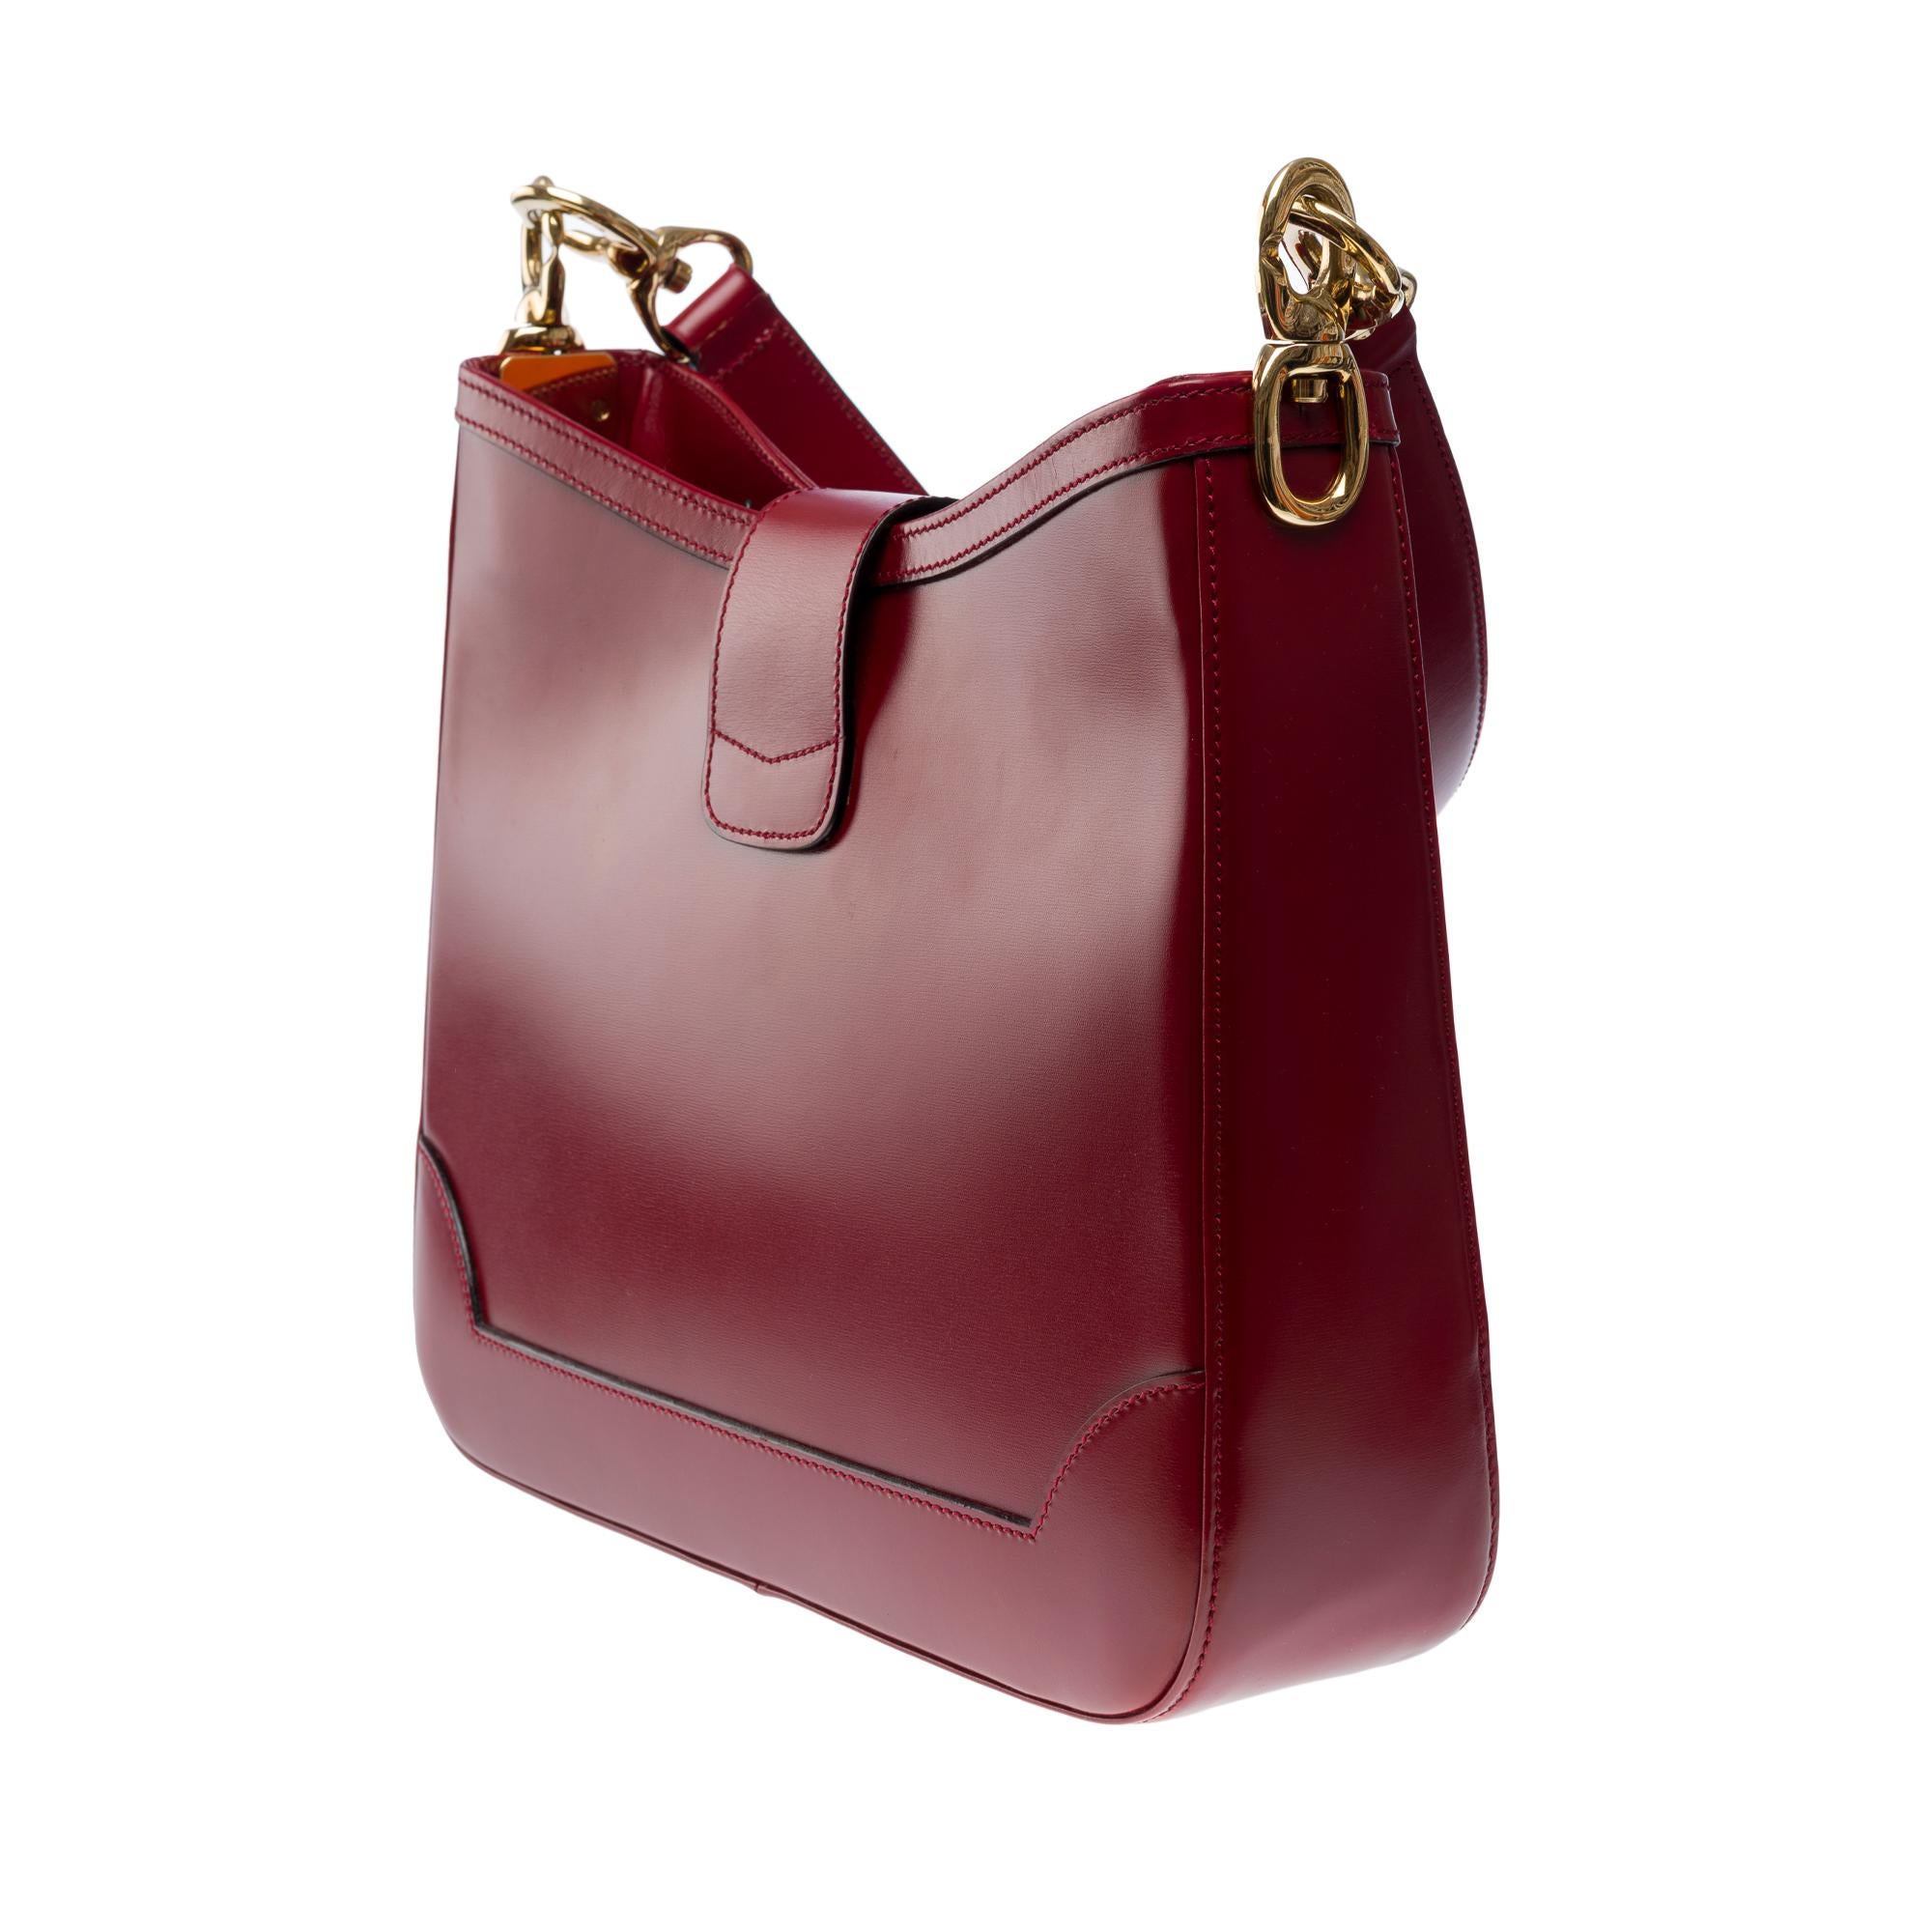 Gorgeous Celine vintage Tote bag in red cherry box calf, GHW For Sale 1